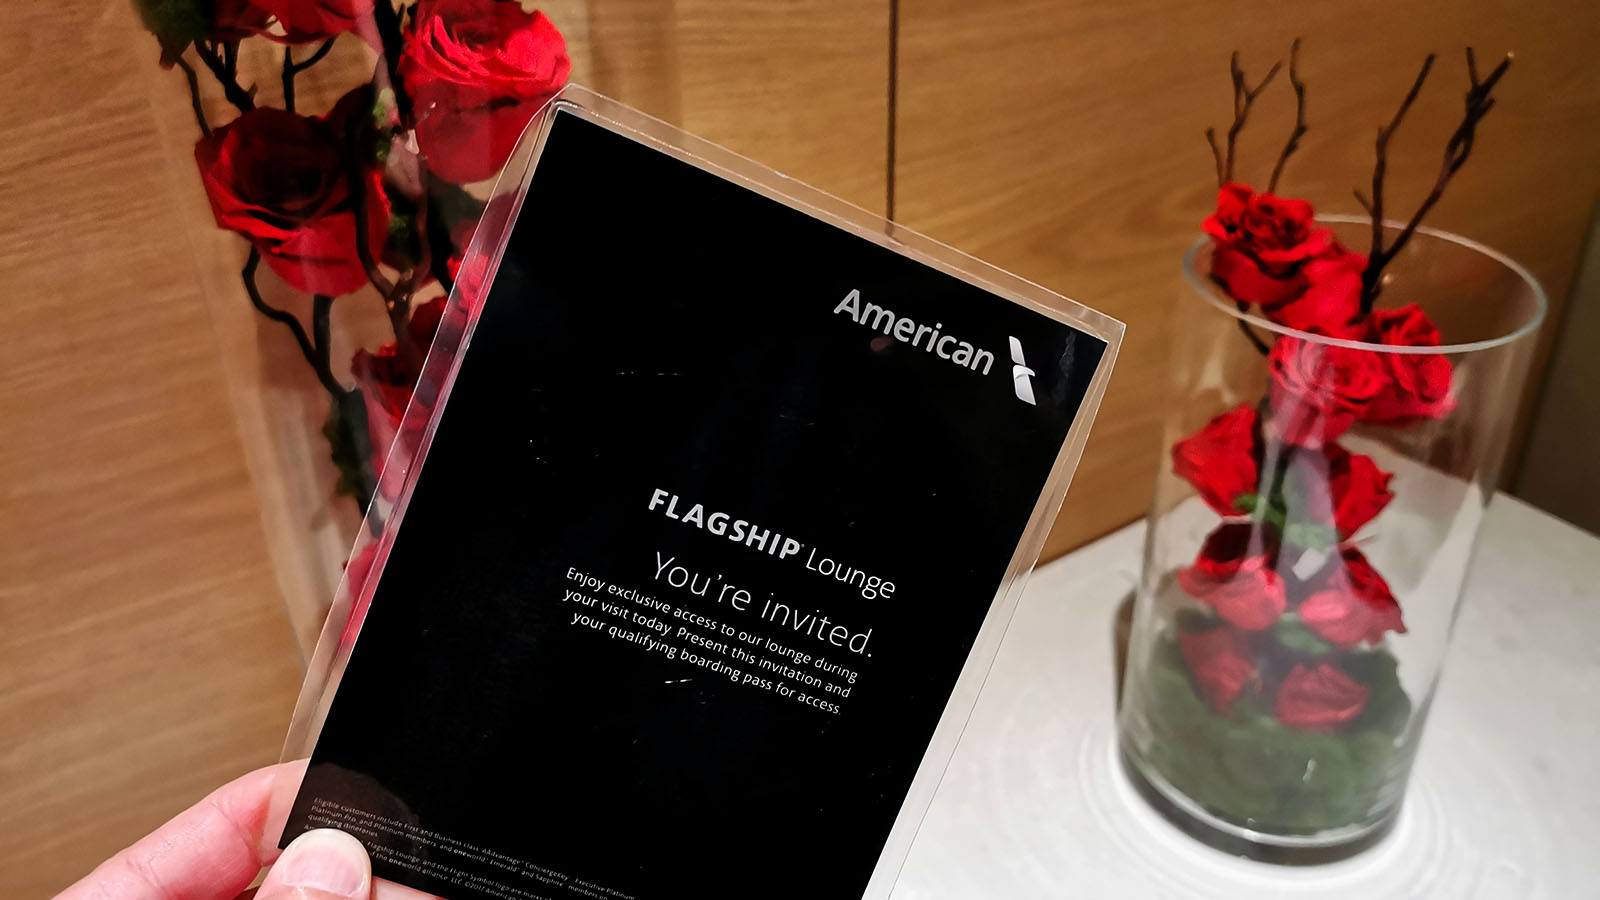 Invitation to the American Airlines Flagship Lounge, Los Angeles